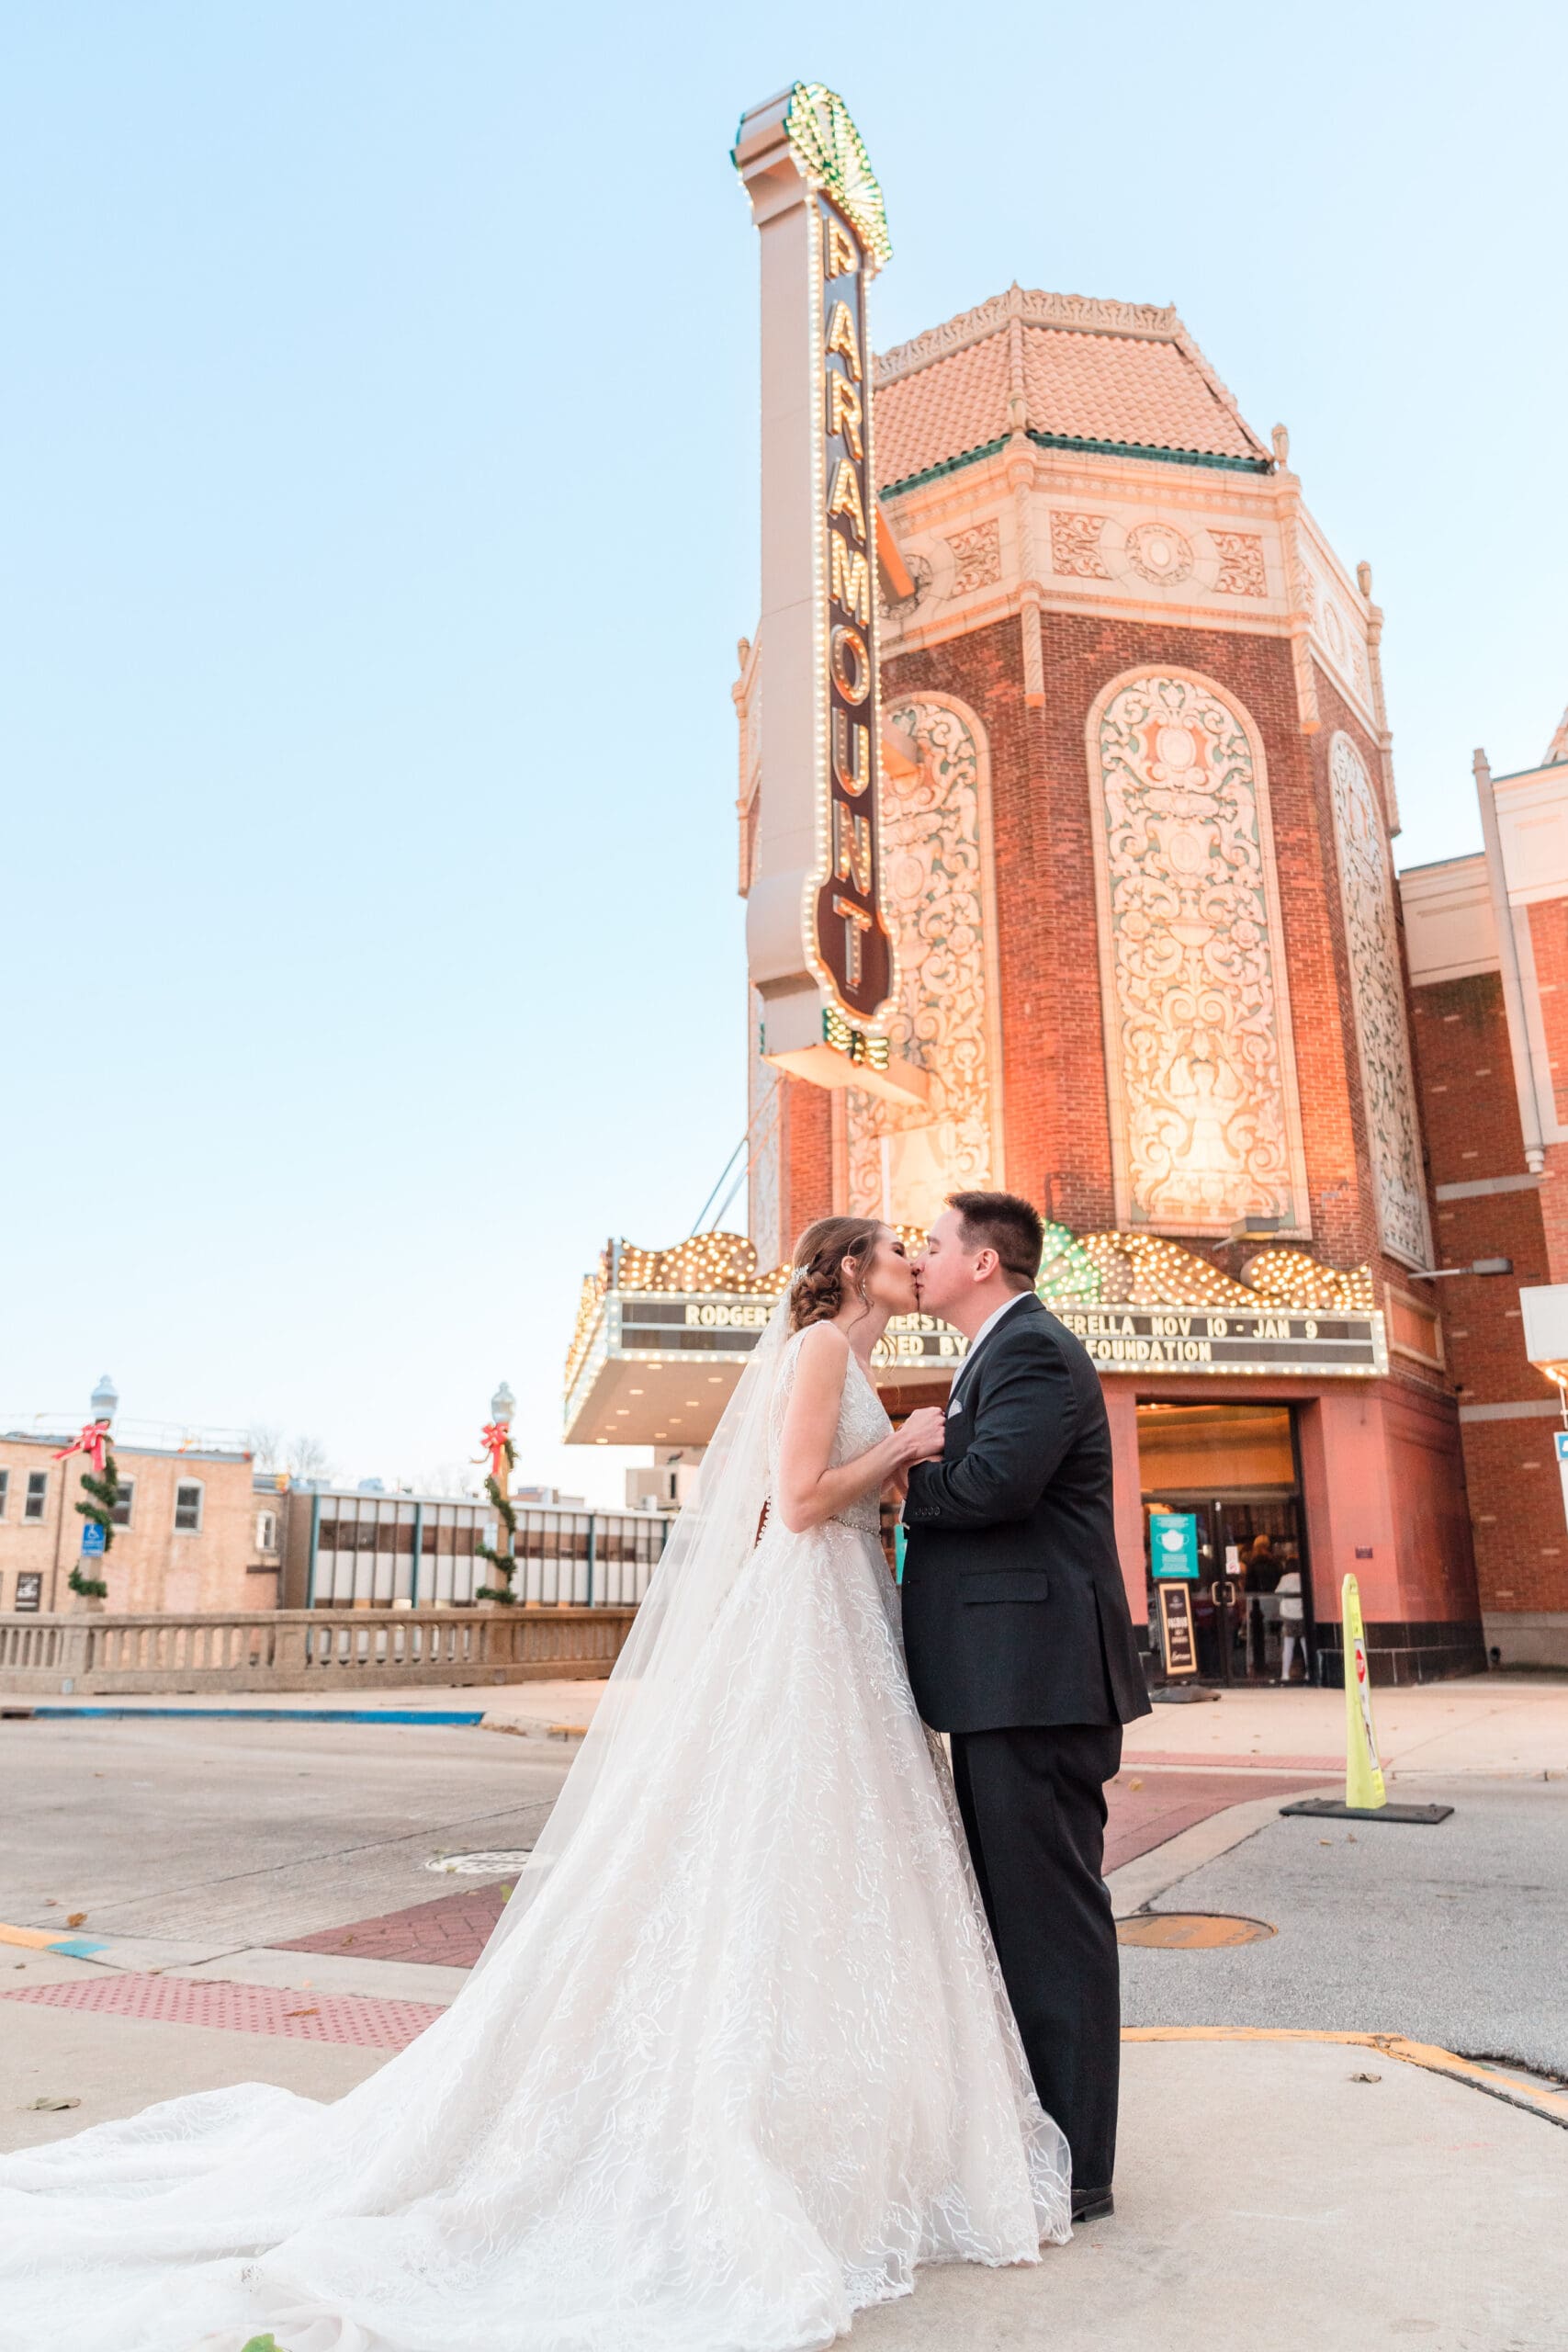 Iconic moment in front of Paramount Theater: Couple shares a passionate kiss with the iconic Paramount sign visible in the background, capturing the essence of their love against the backdrop of Denver, Colorado